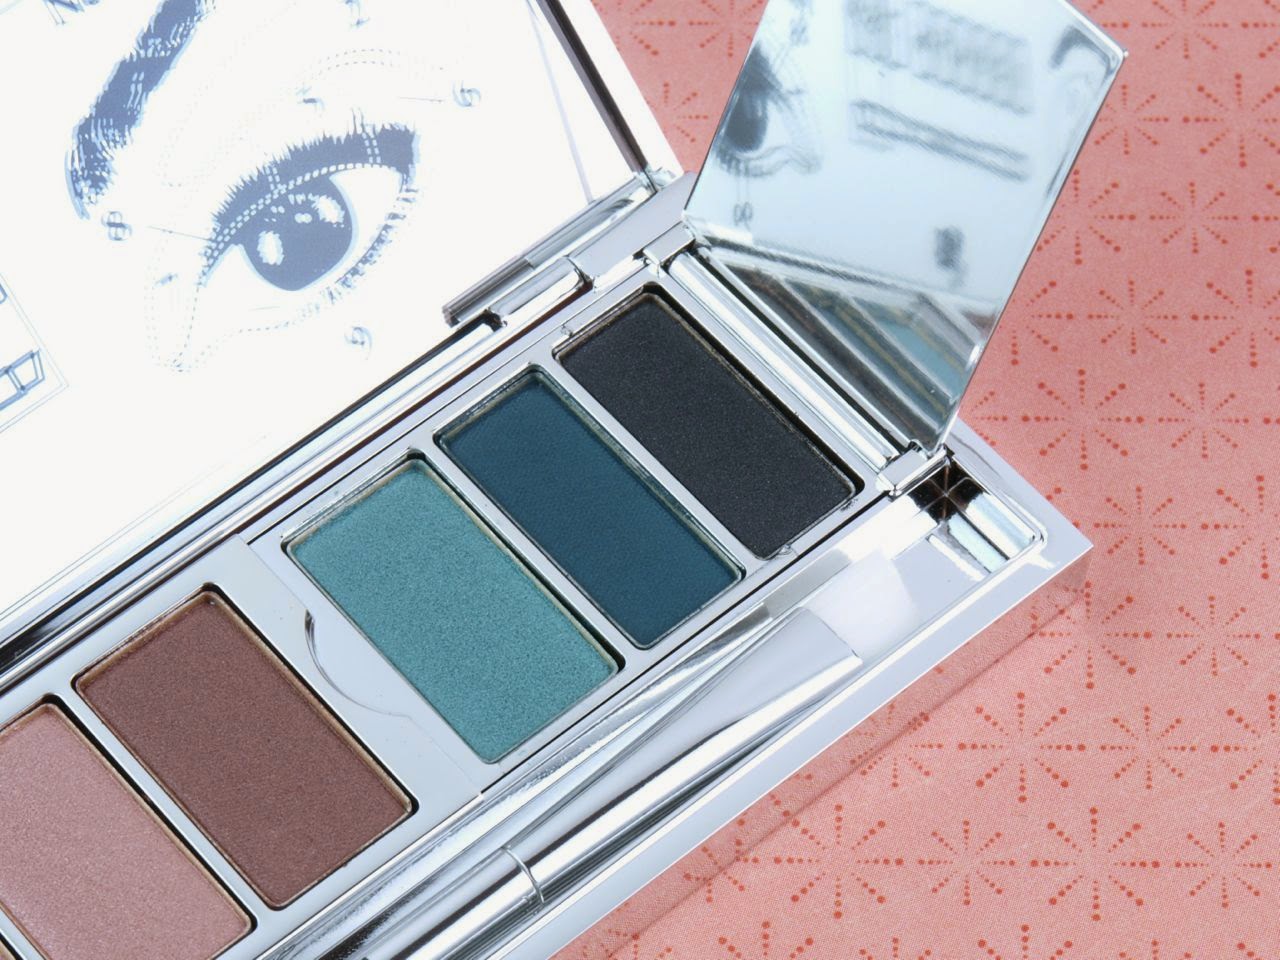 Lancome Spring 2015 My French Eyeshadow Palette: Review and Swatches